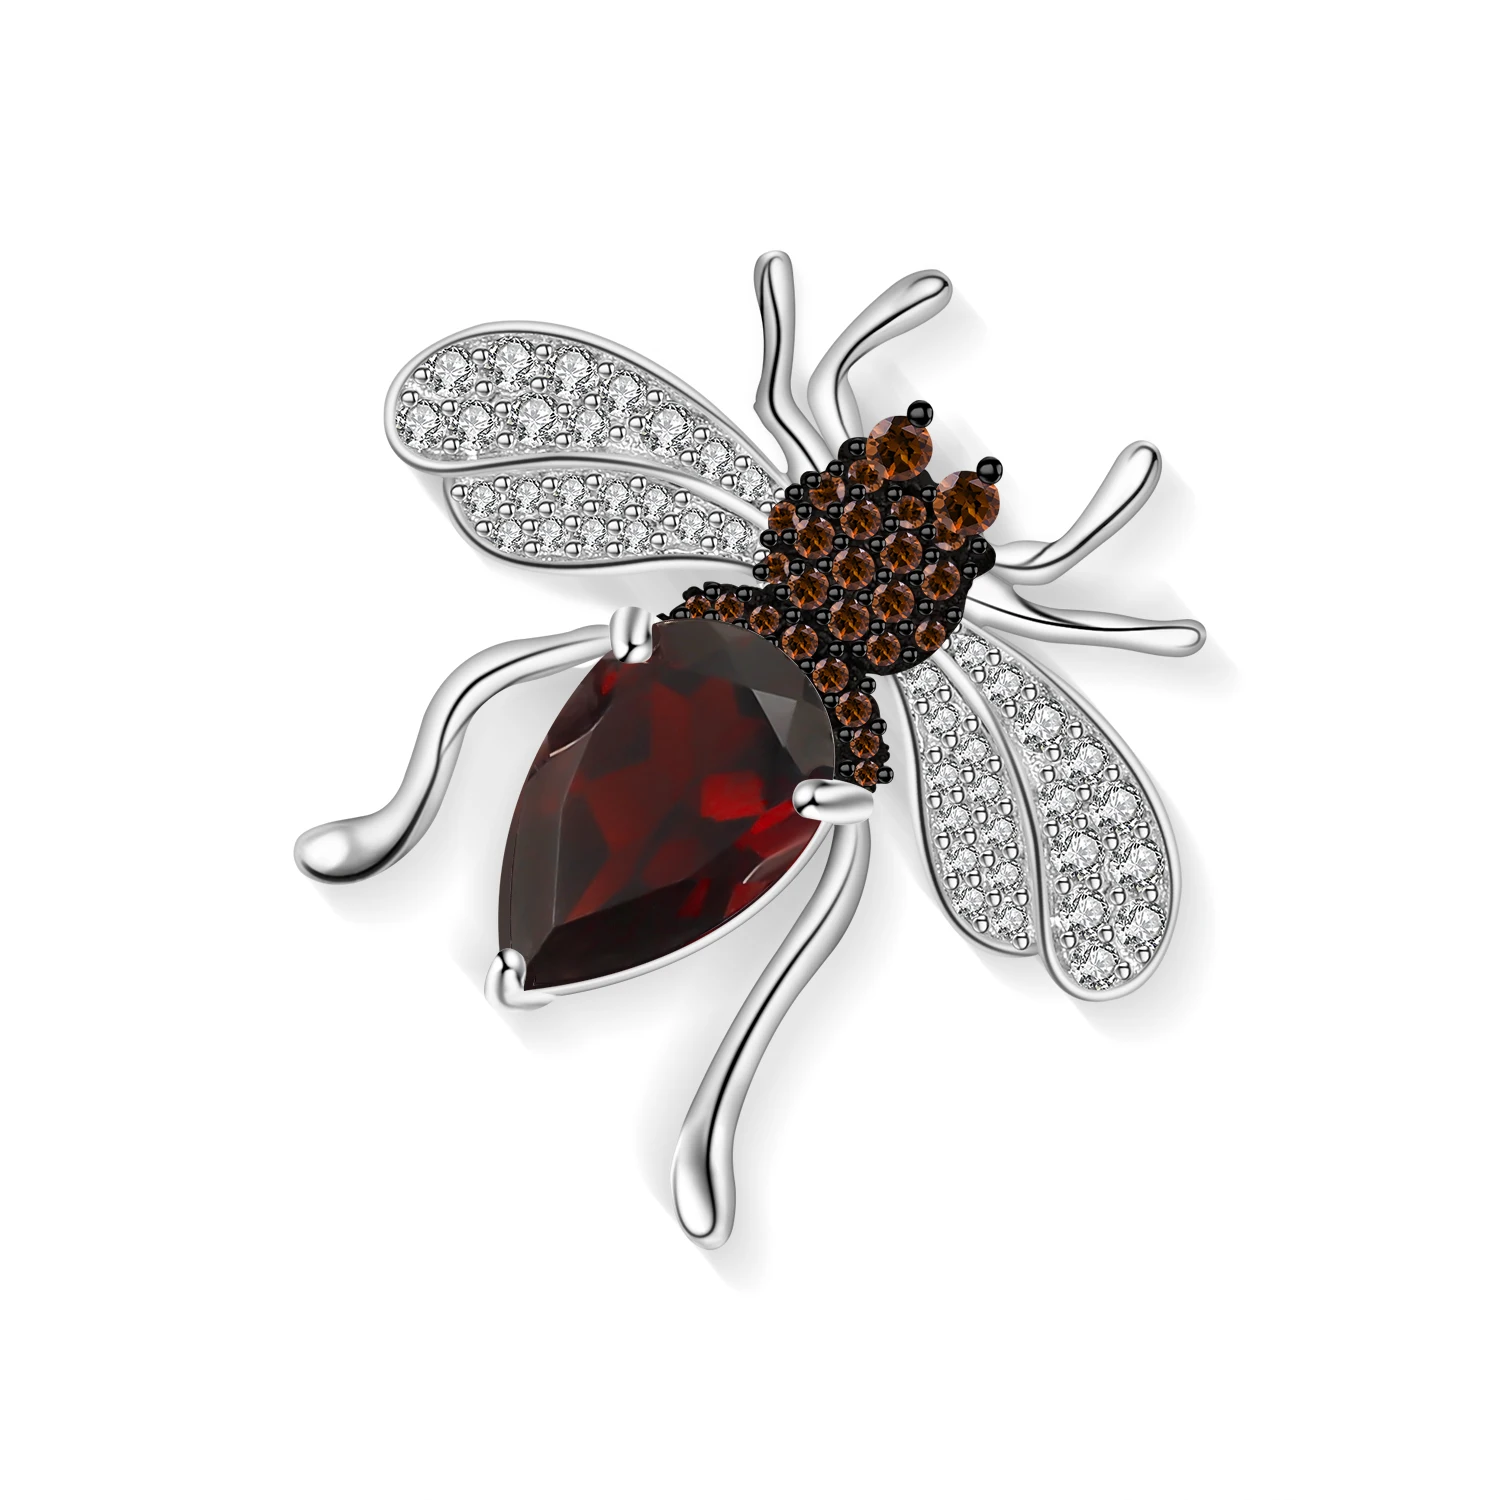 

GEM'S BALLET 3.1Ct Natural Red Garnet Gemstone Pin Brooch Jewelry Luxury For Women 925 Sterling Sliver Beautiful Bee Brooches